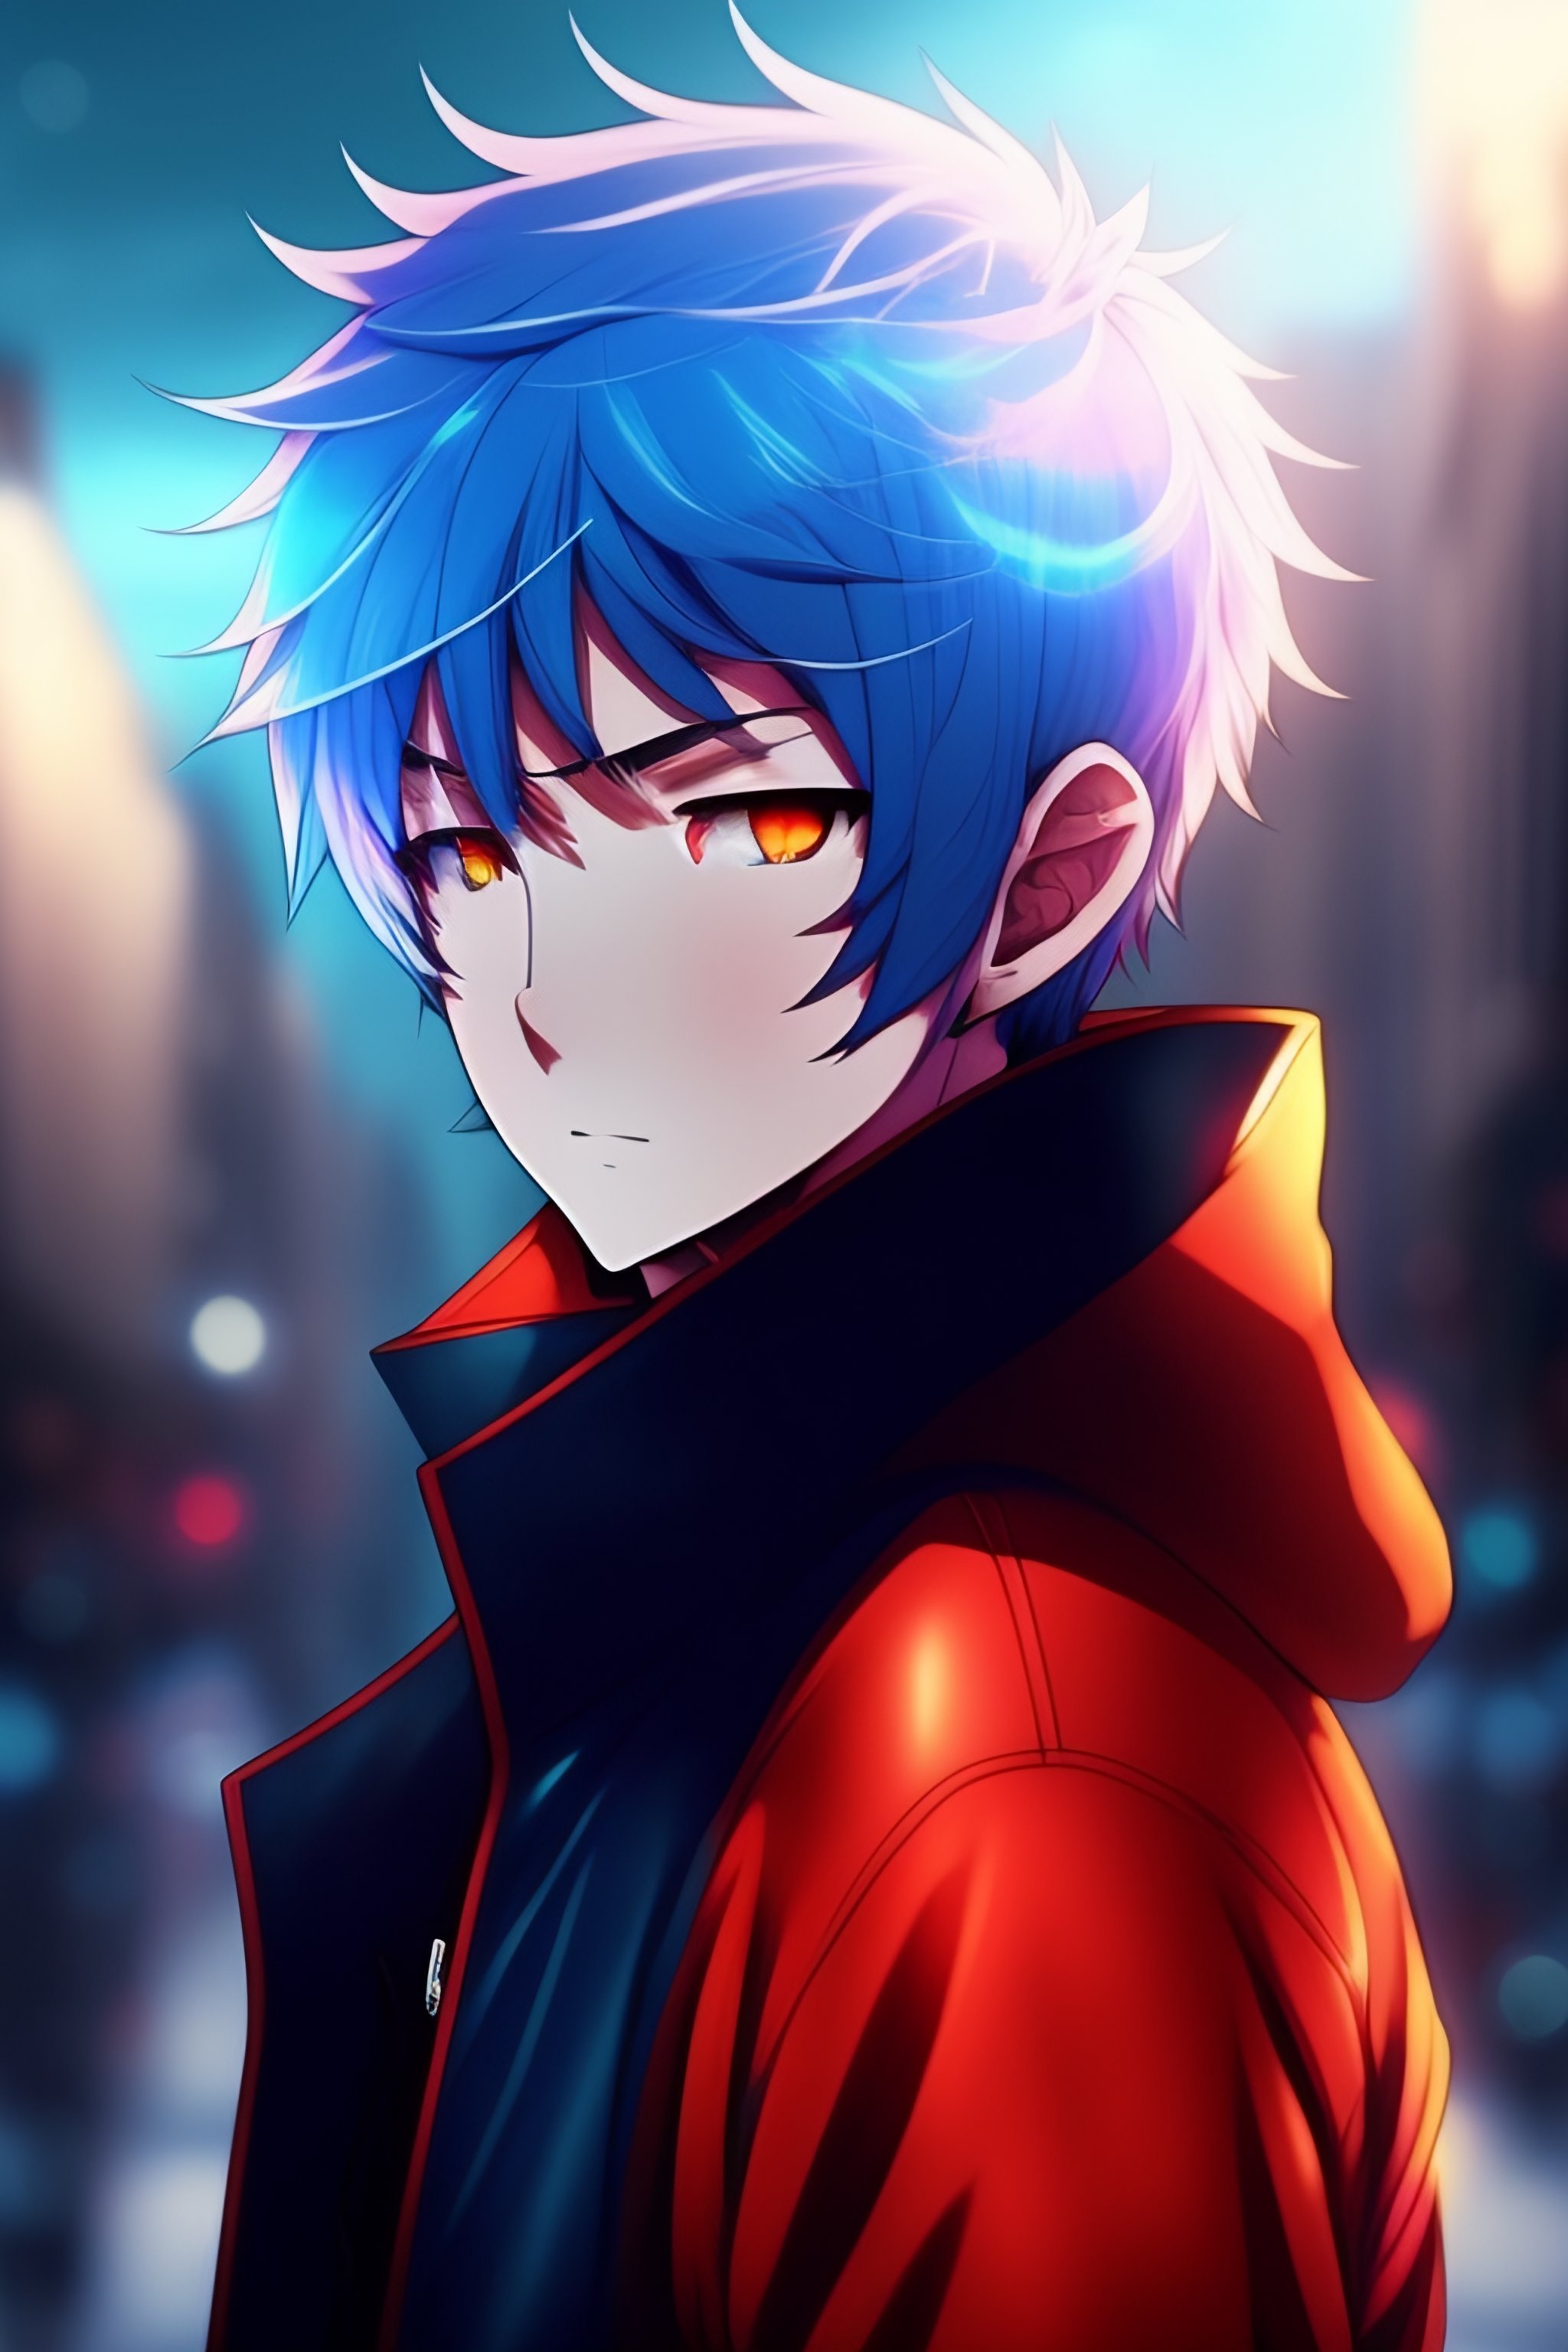 Cool Anime Boy Red Hair 2.0's Code & Price - RblxTrade